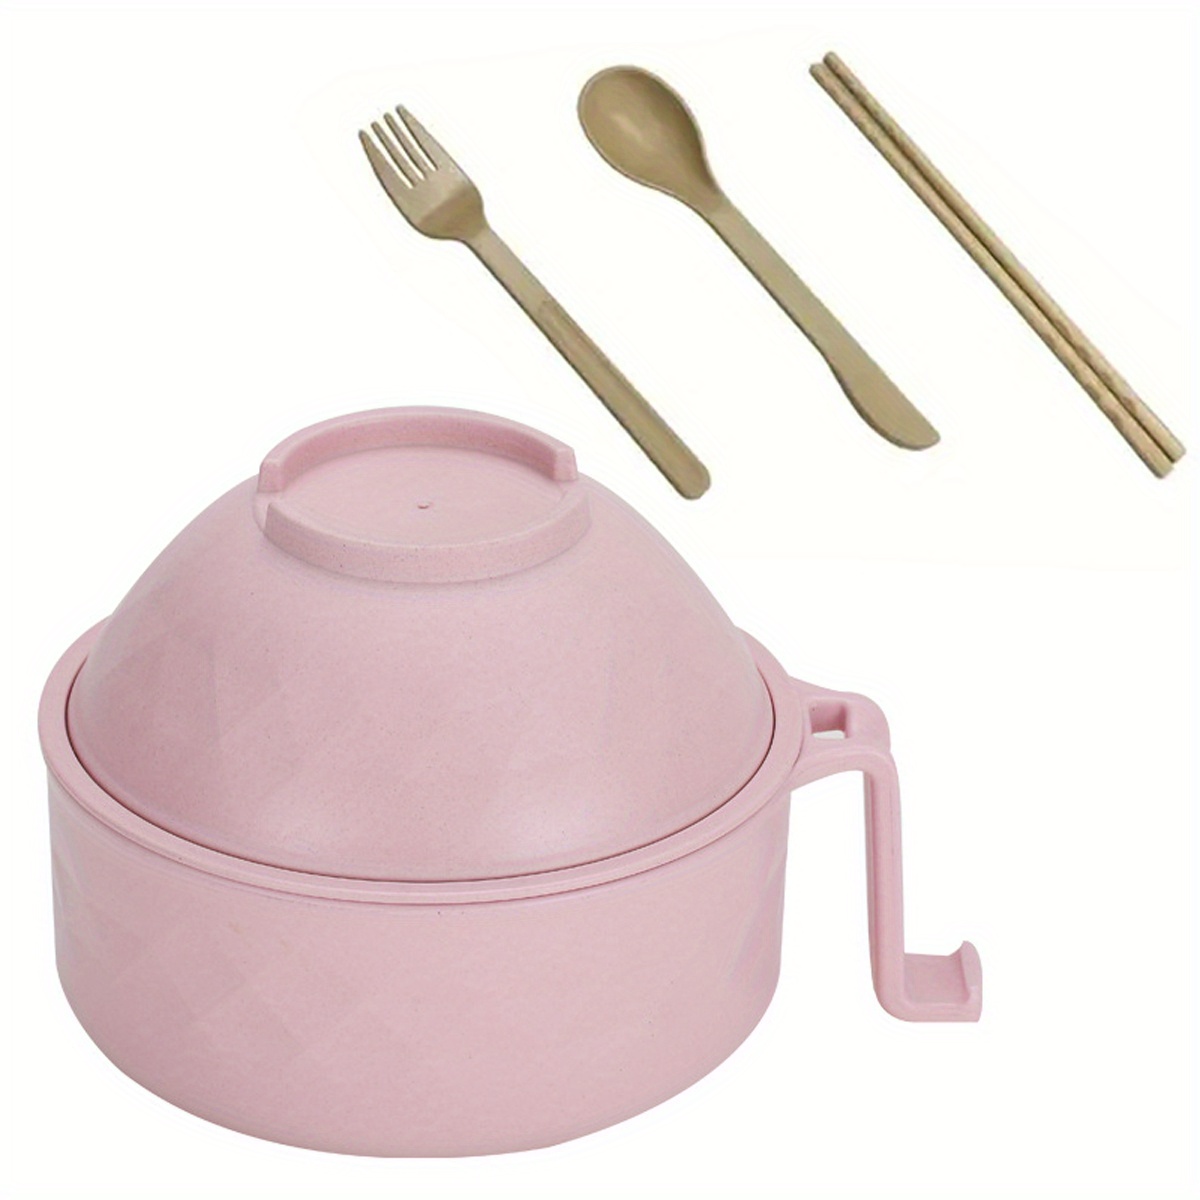 Travelwant Microwave Bowl with Lid, Microwave Soup Bowl with Lid, Noodle Bowl for Ramen, Soup, Beverages, Pink